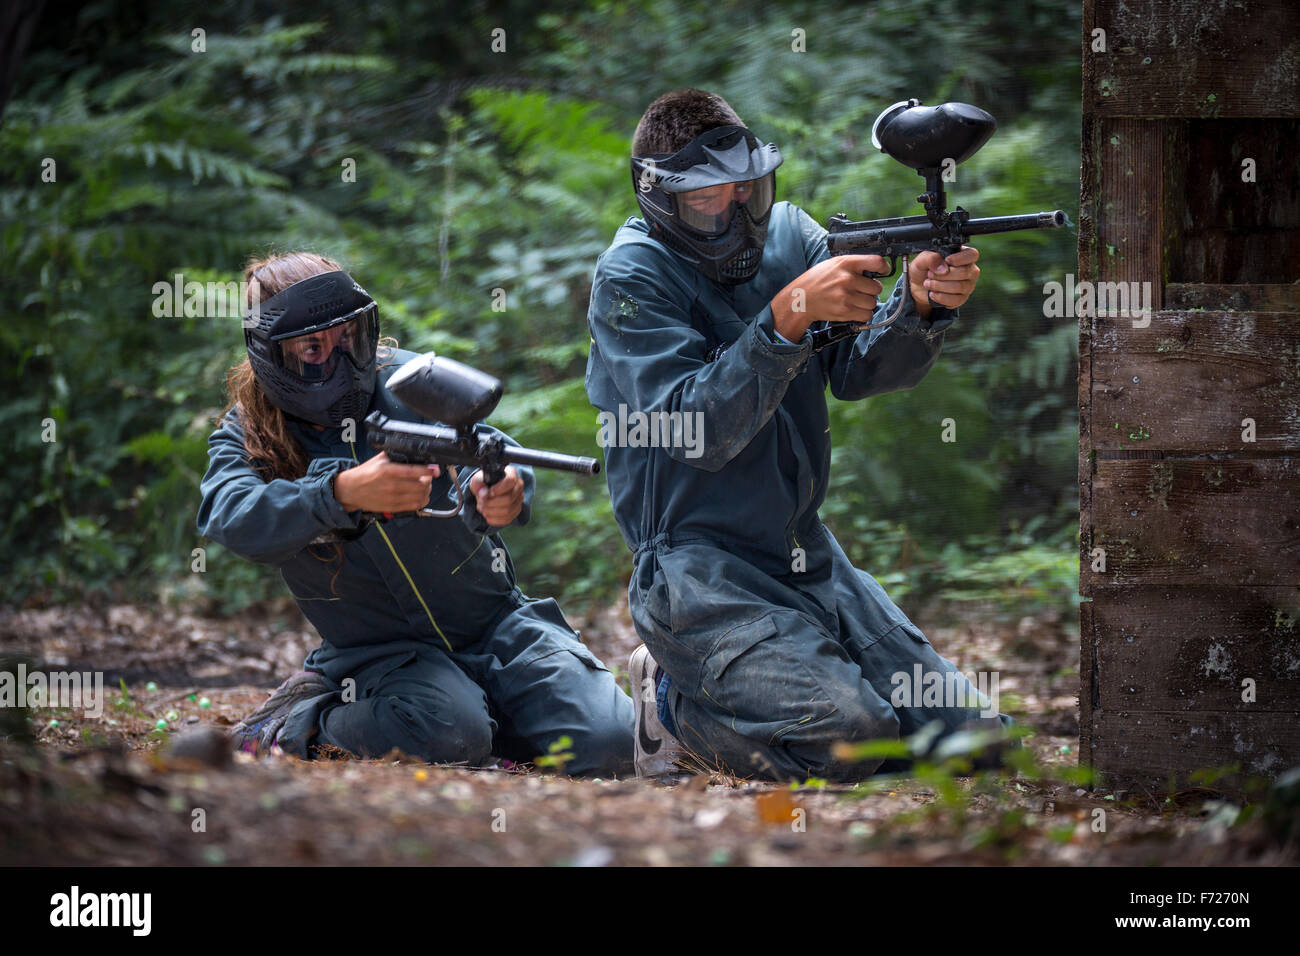 Paintball player teenagers at work. Adolescents joueurs de paintball en action. Stock Photo